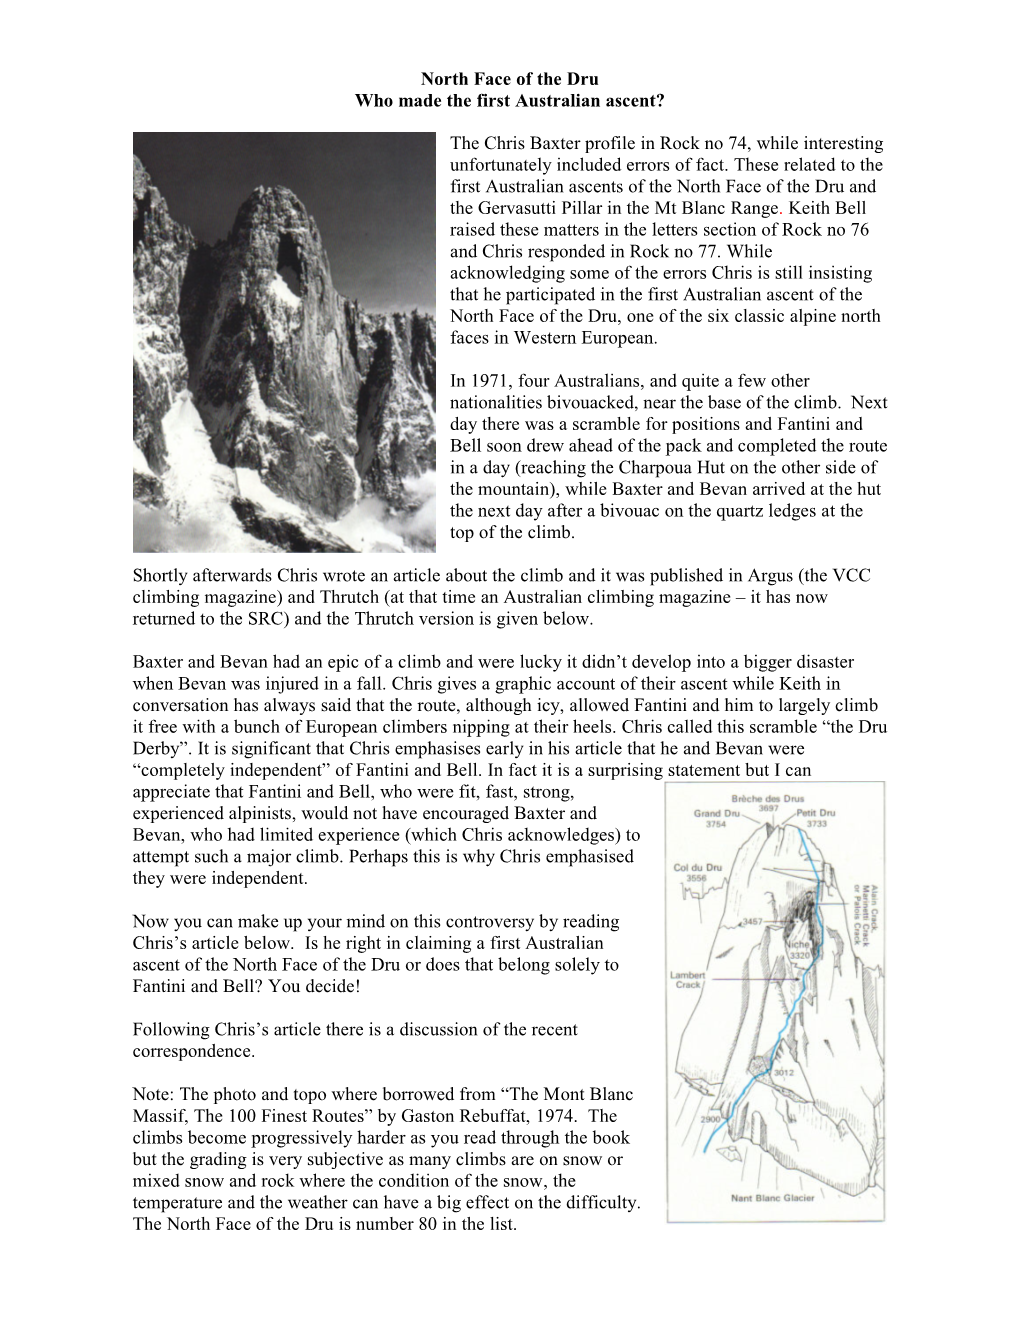 North Face of the Dru Who Made the First Australian Ascent?